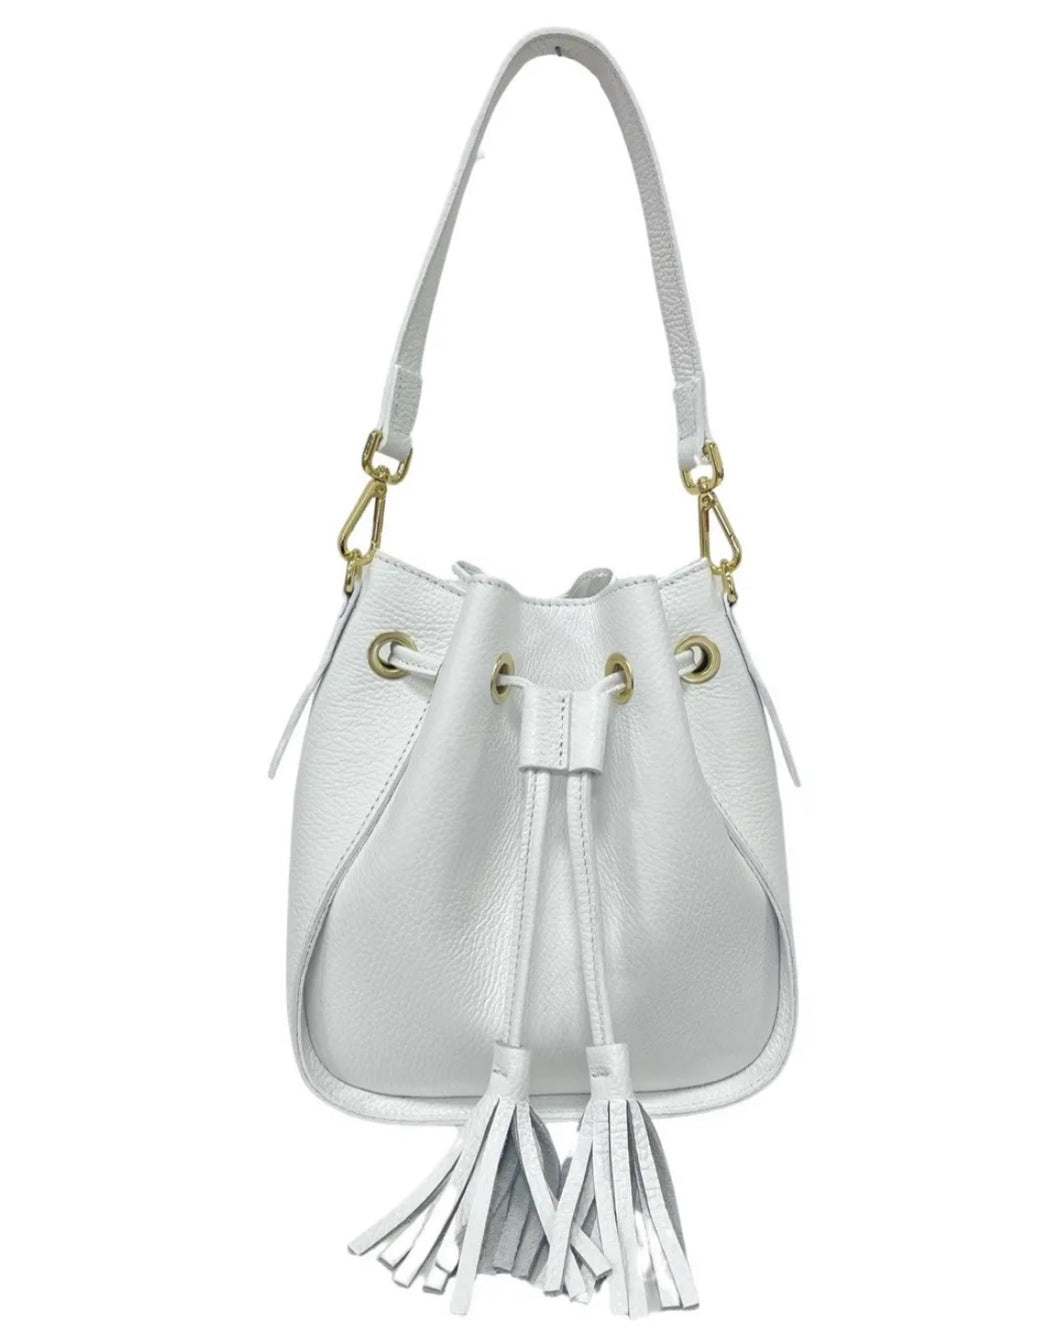 Lily White Leather Hand Bag